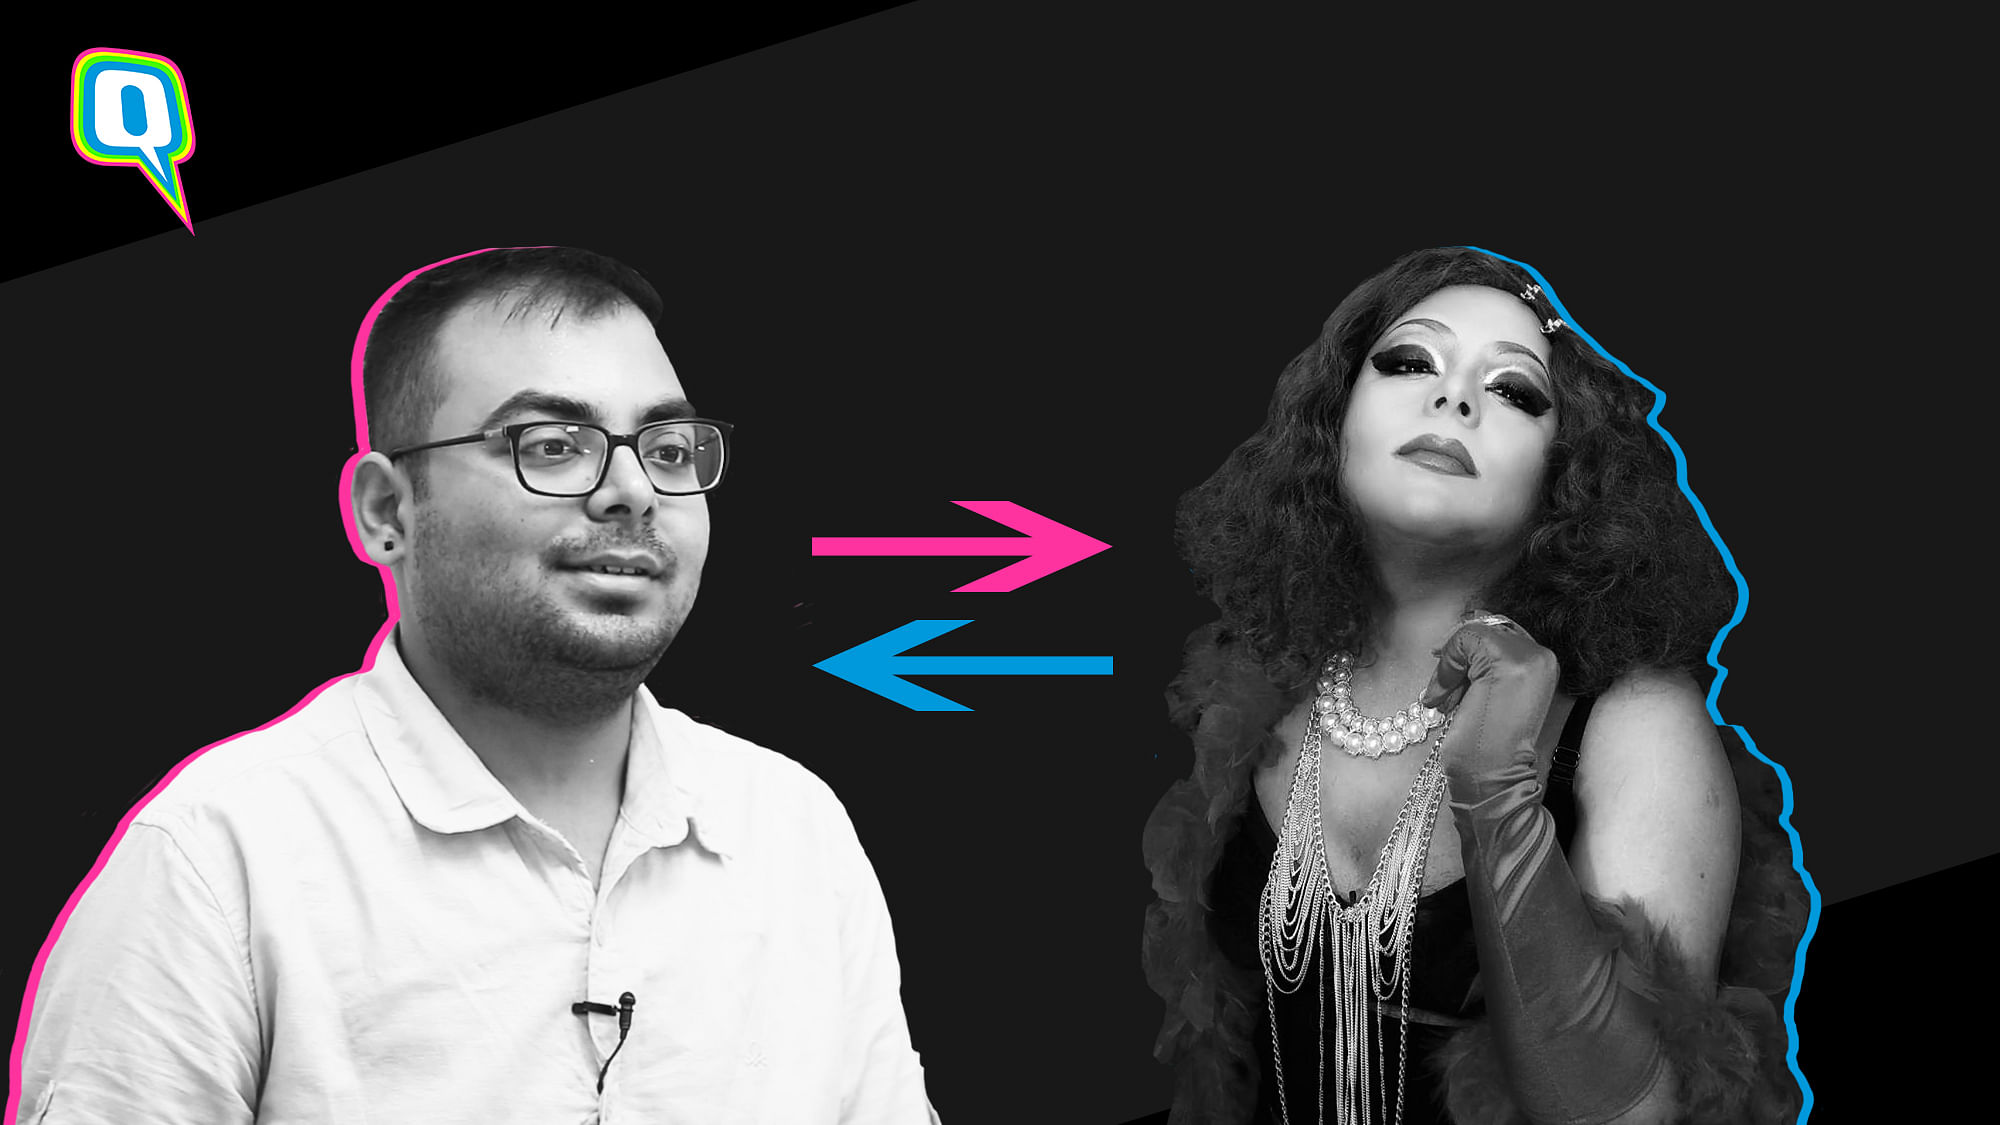 Ayushman Aishwarya is a human rights lawyer who uses drag as an art to express himself.